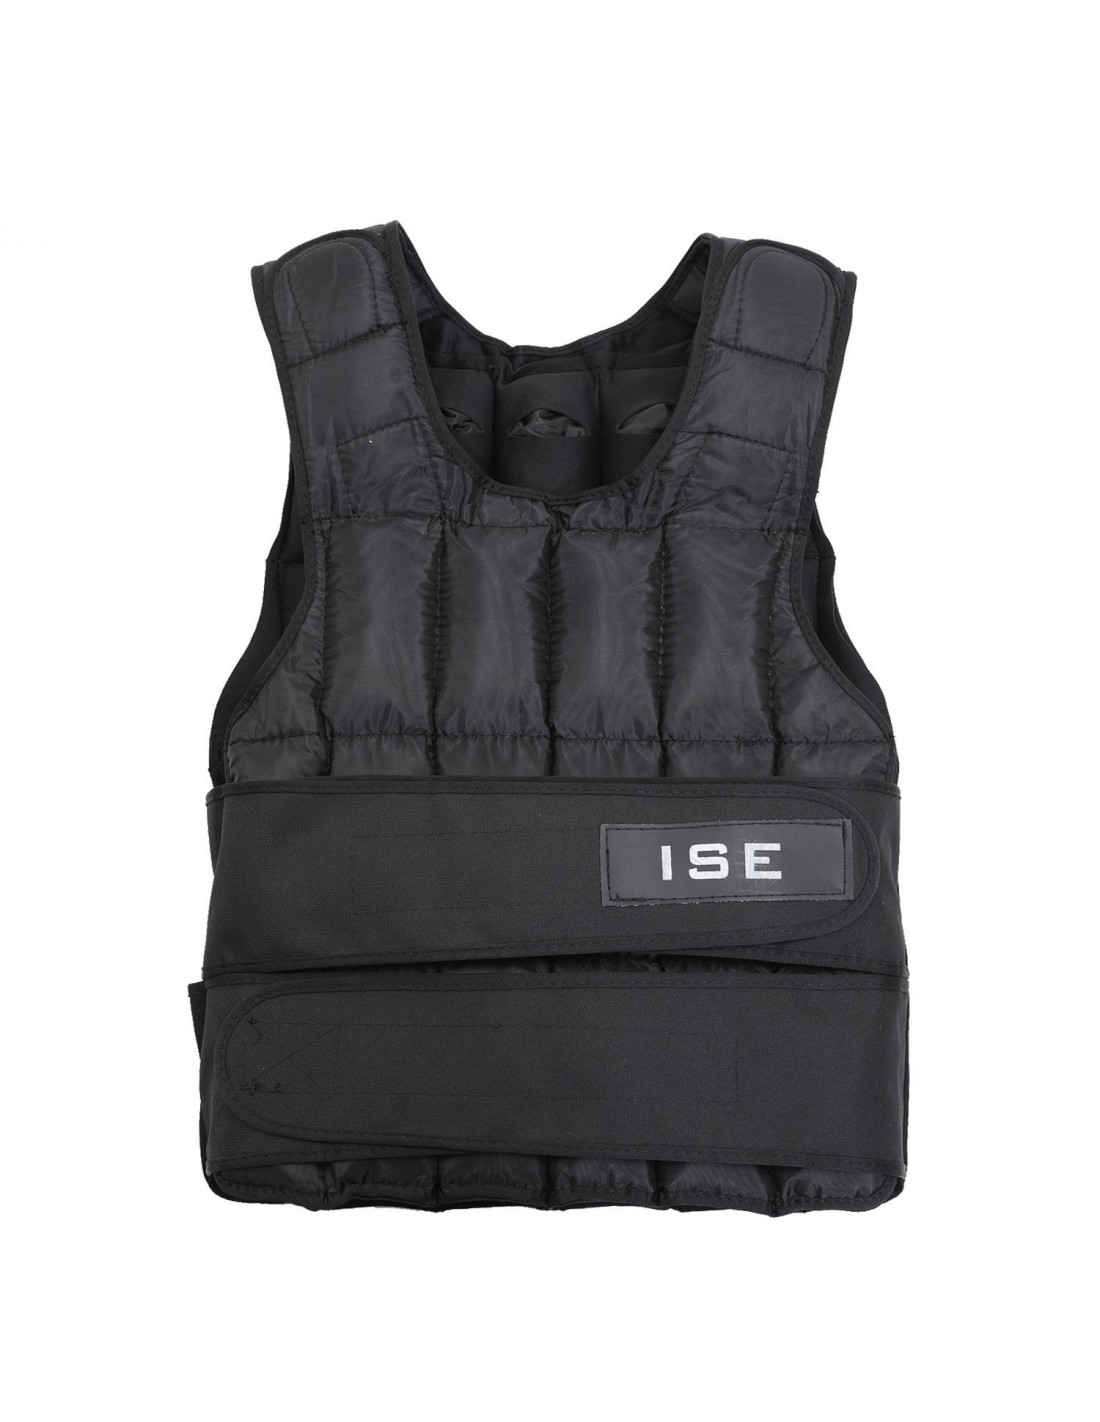 https://isefit.com/19210-thickbox_default/ise-fit-weighted-vest-adjustable-weight-cross-training-25-kg.jpg